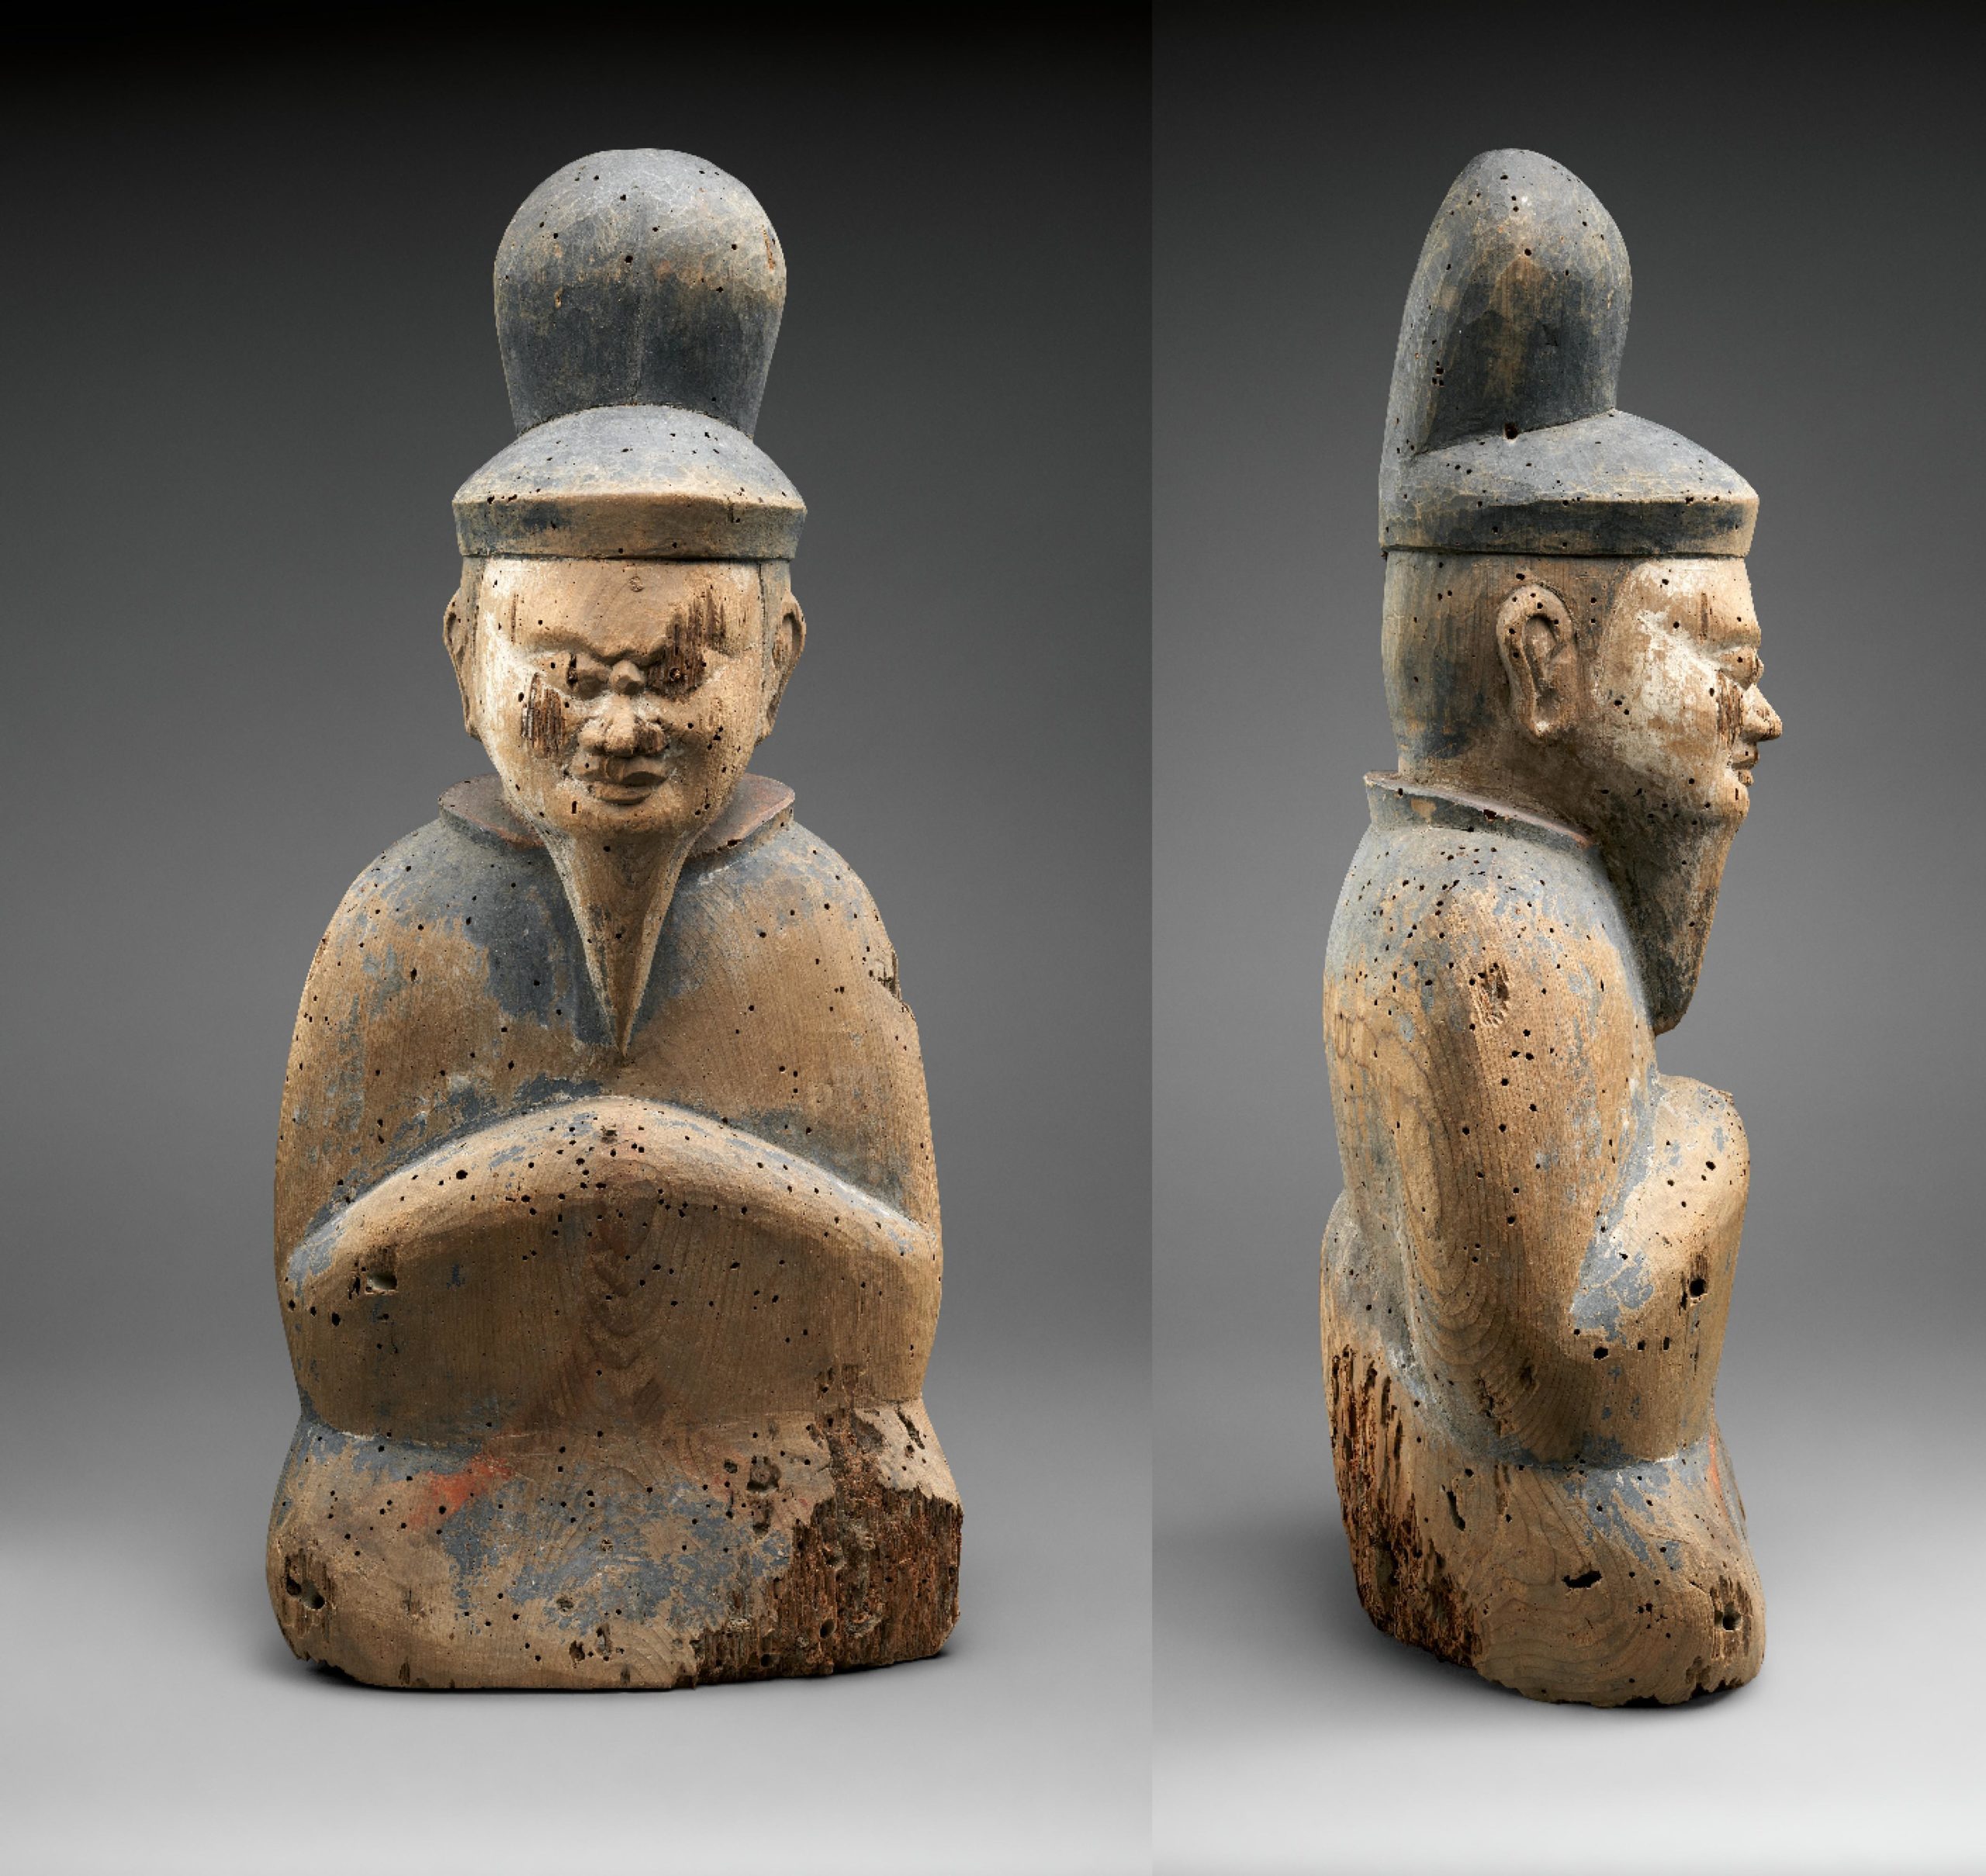 MET Museum_ Kyoto_Shinto Deity as a Seated Courtier_11th–12th century_DP702343_850 W